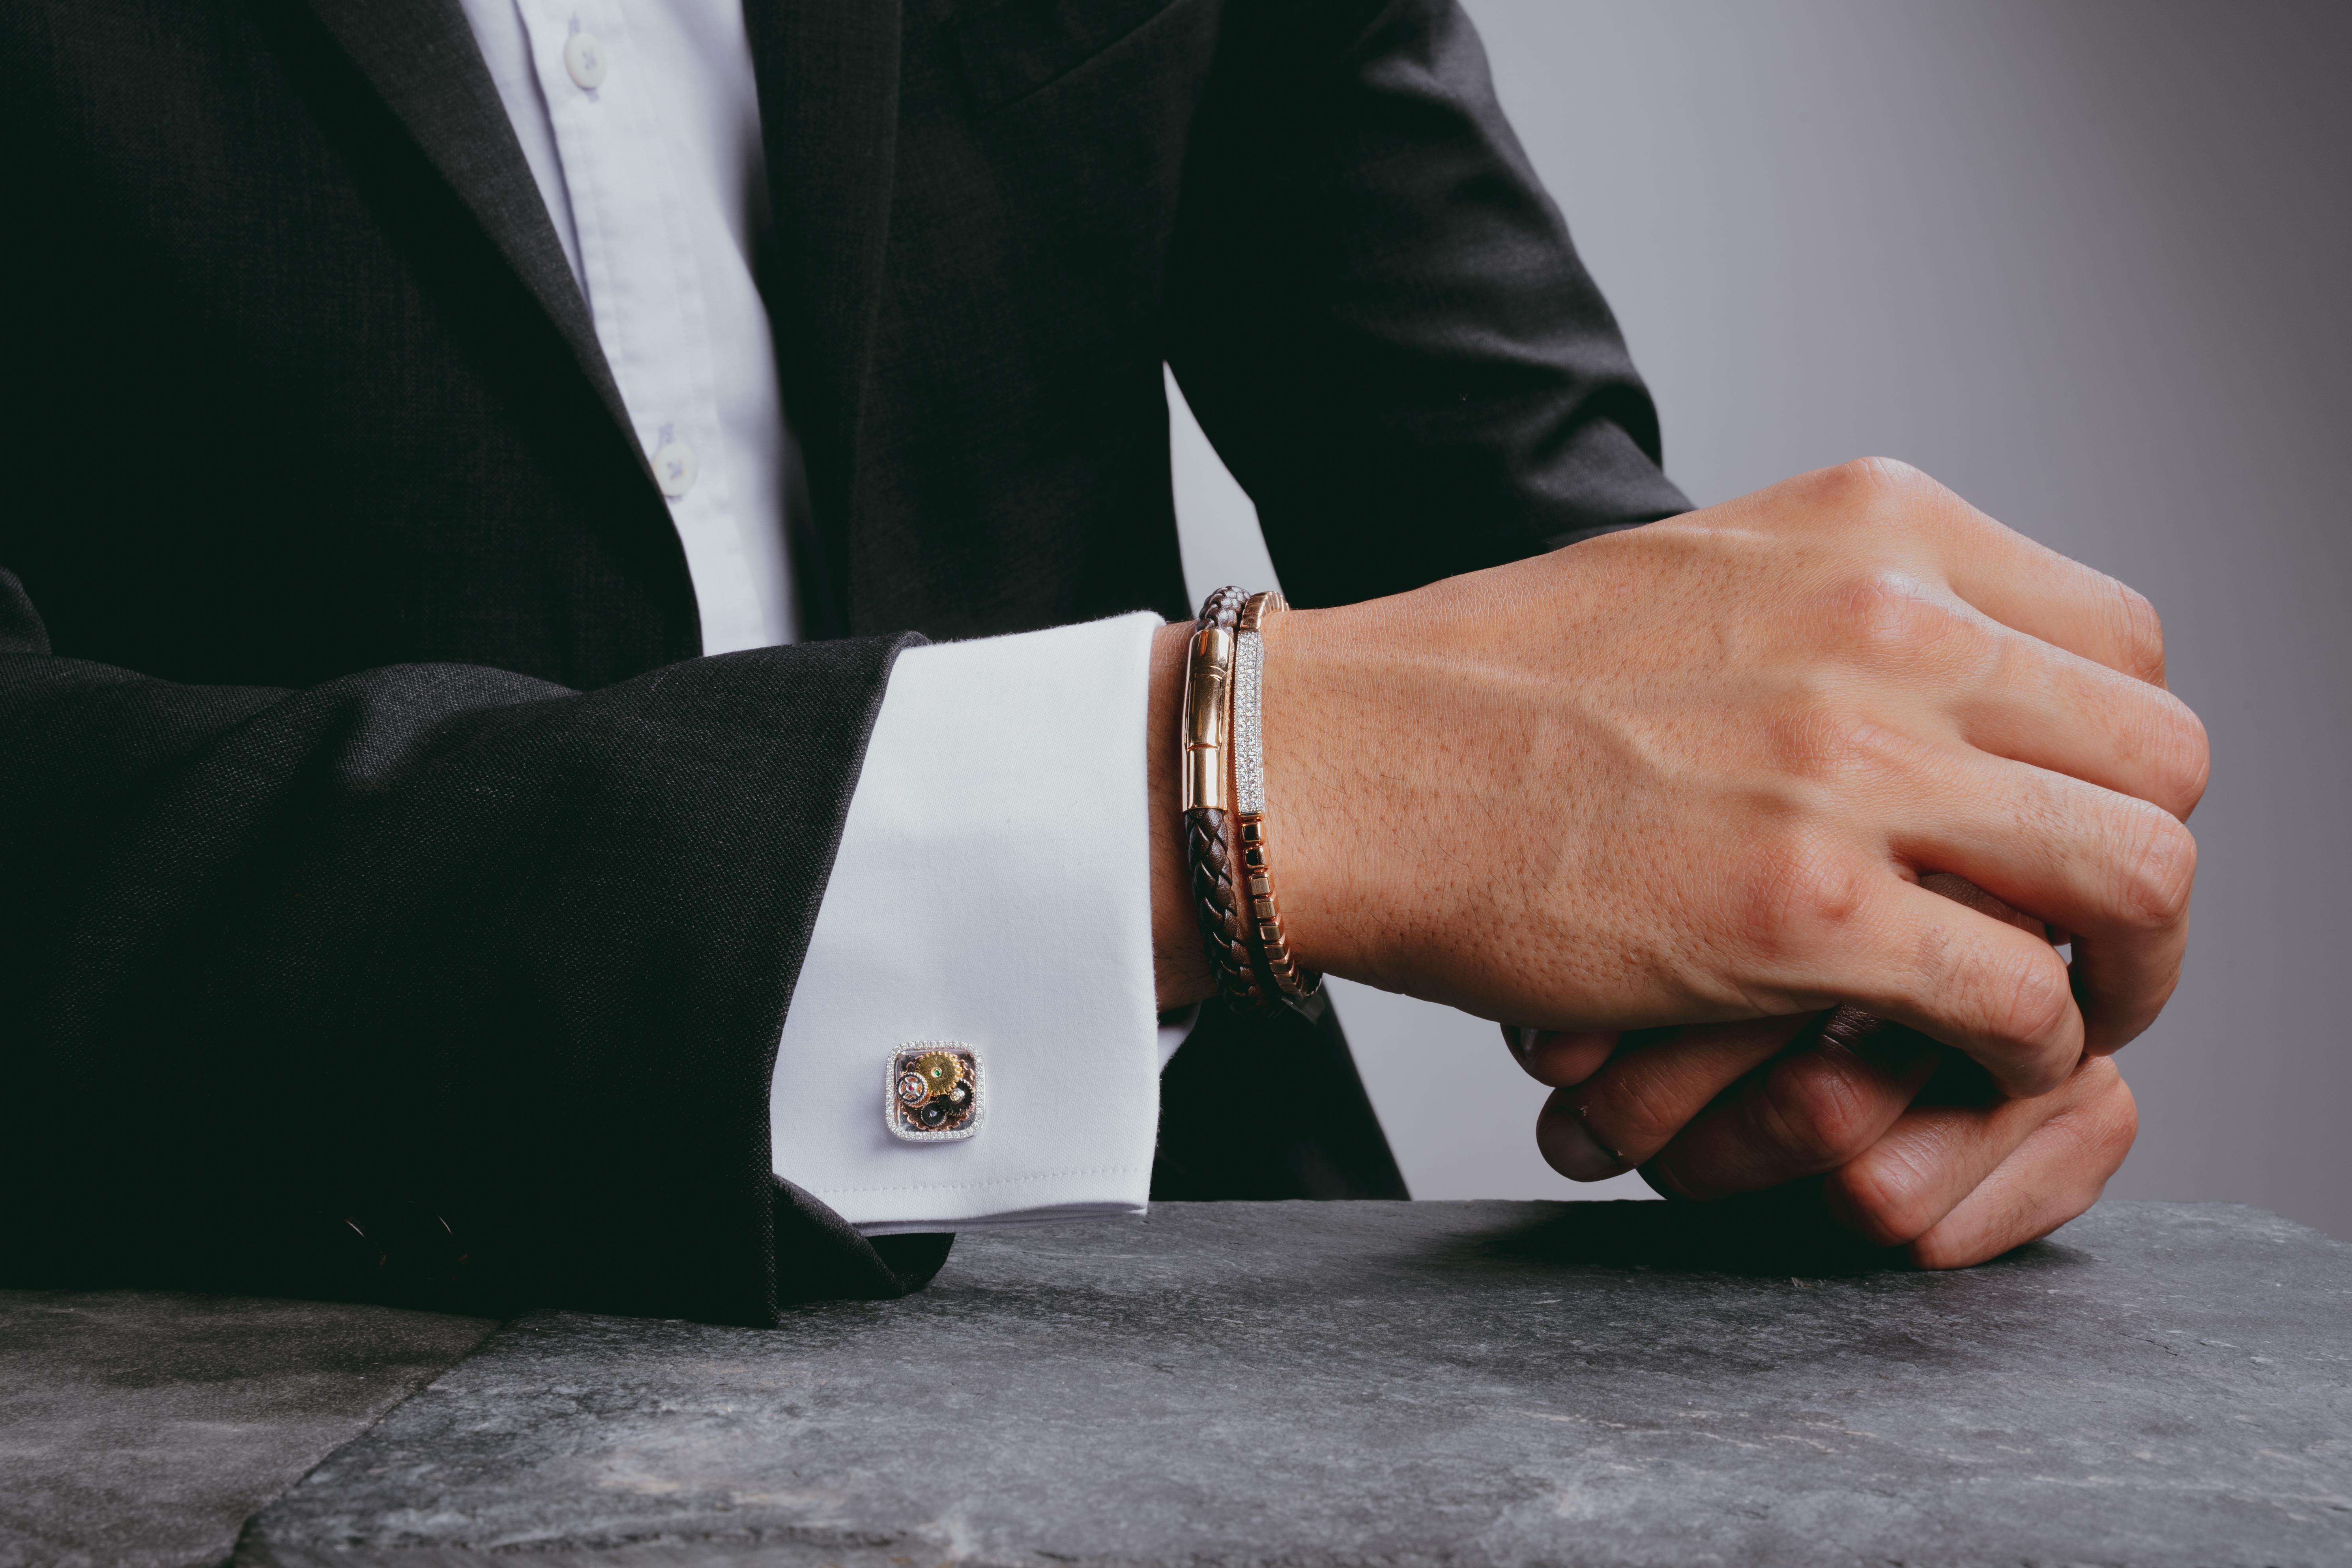 You simply can’t beat the sheer luxury and elegance of diamonds, and this beautifully handcrafted men’s bracelet proves it. The inner elastic is concealed by the 18K rose gold inner tube, and the bracelet's central bar is pave set with 120 white